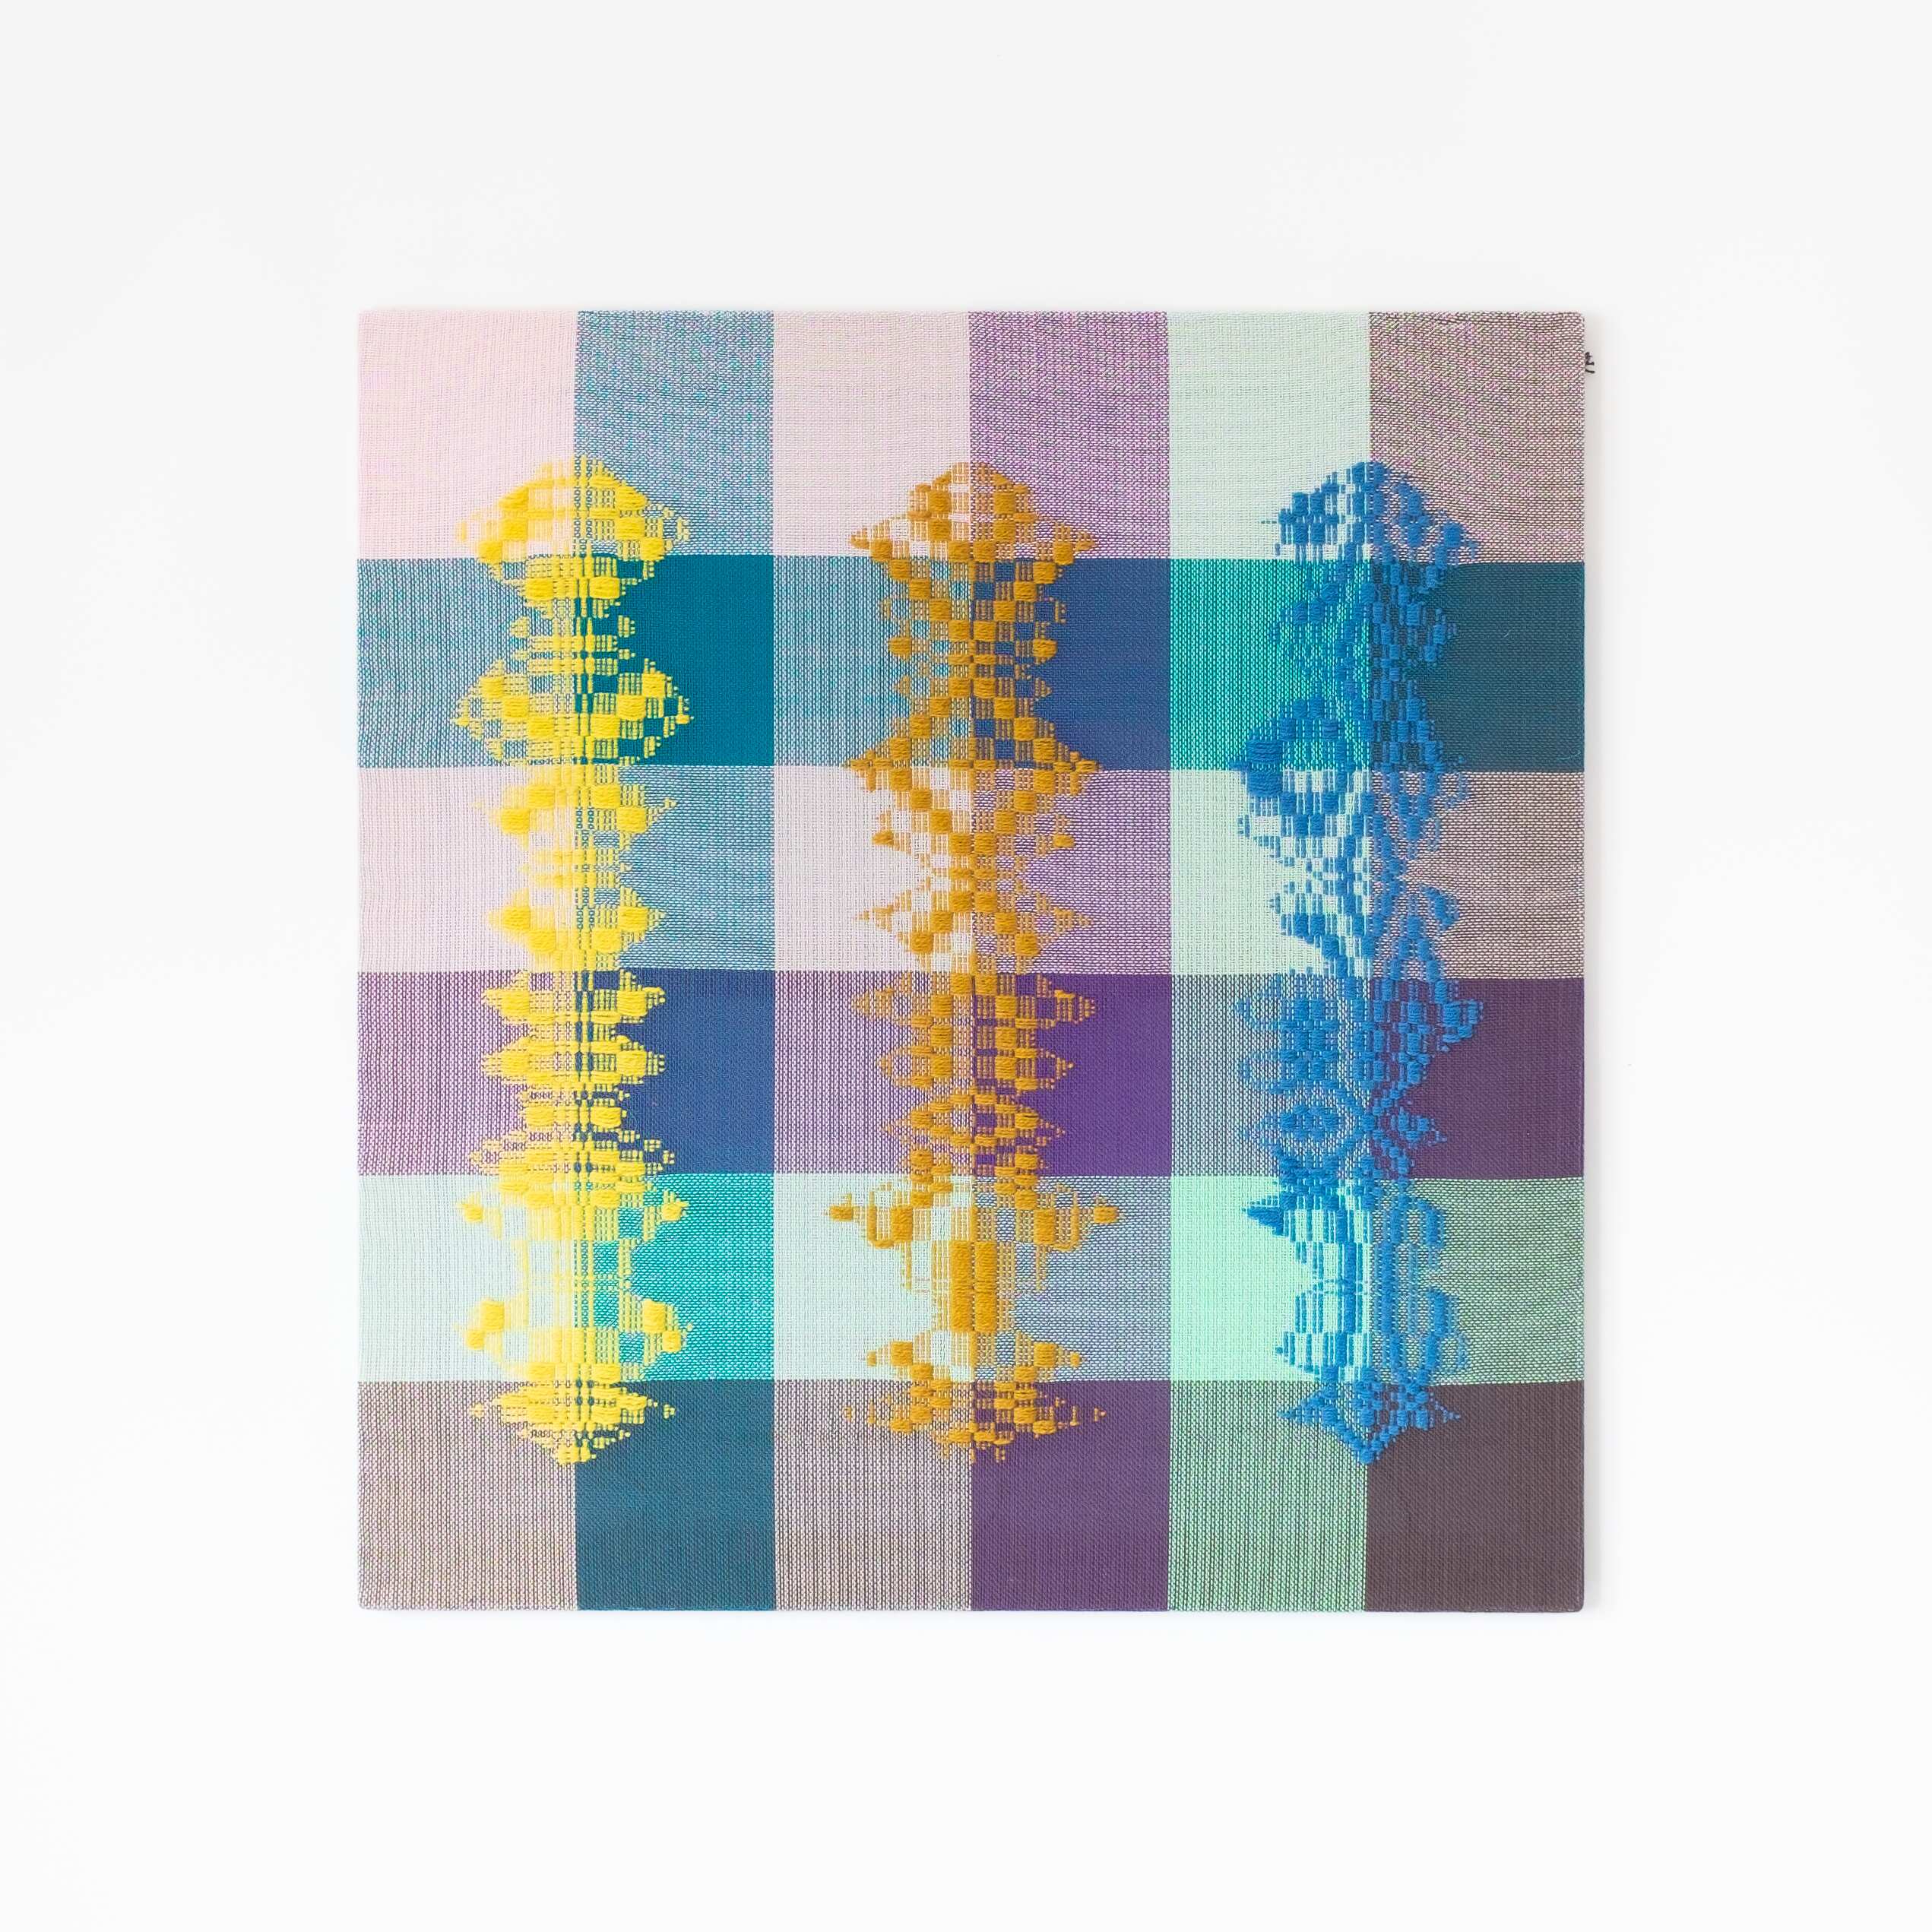 Three beings [yellow-bronze-blue on high-contrast ground], Hand-woven cotton and wool yarn, 2022